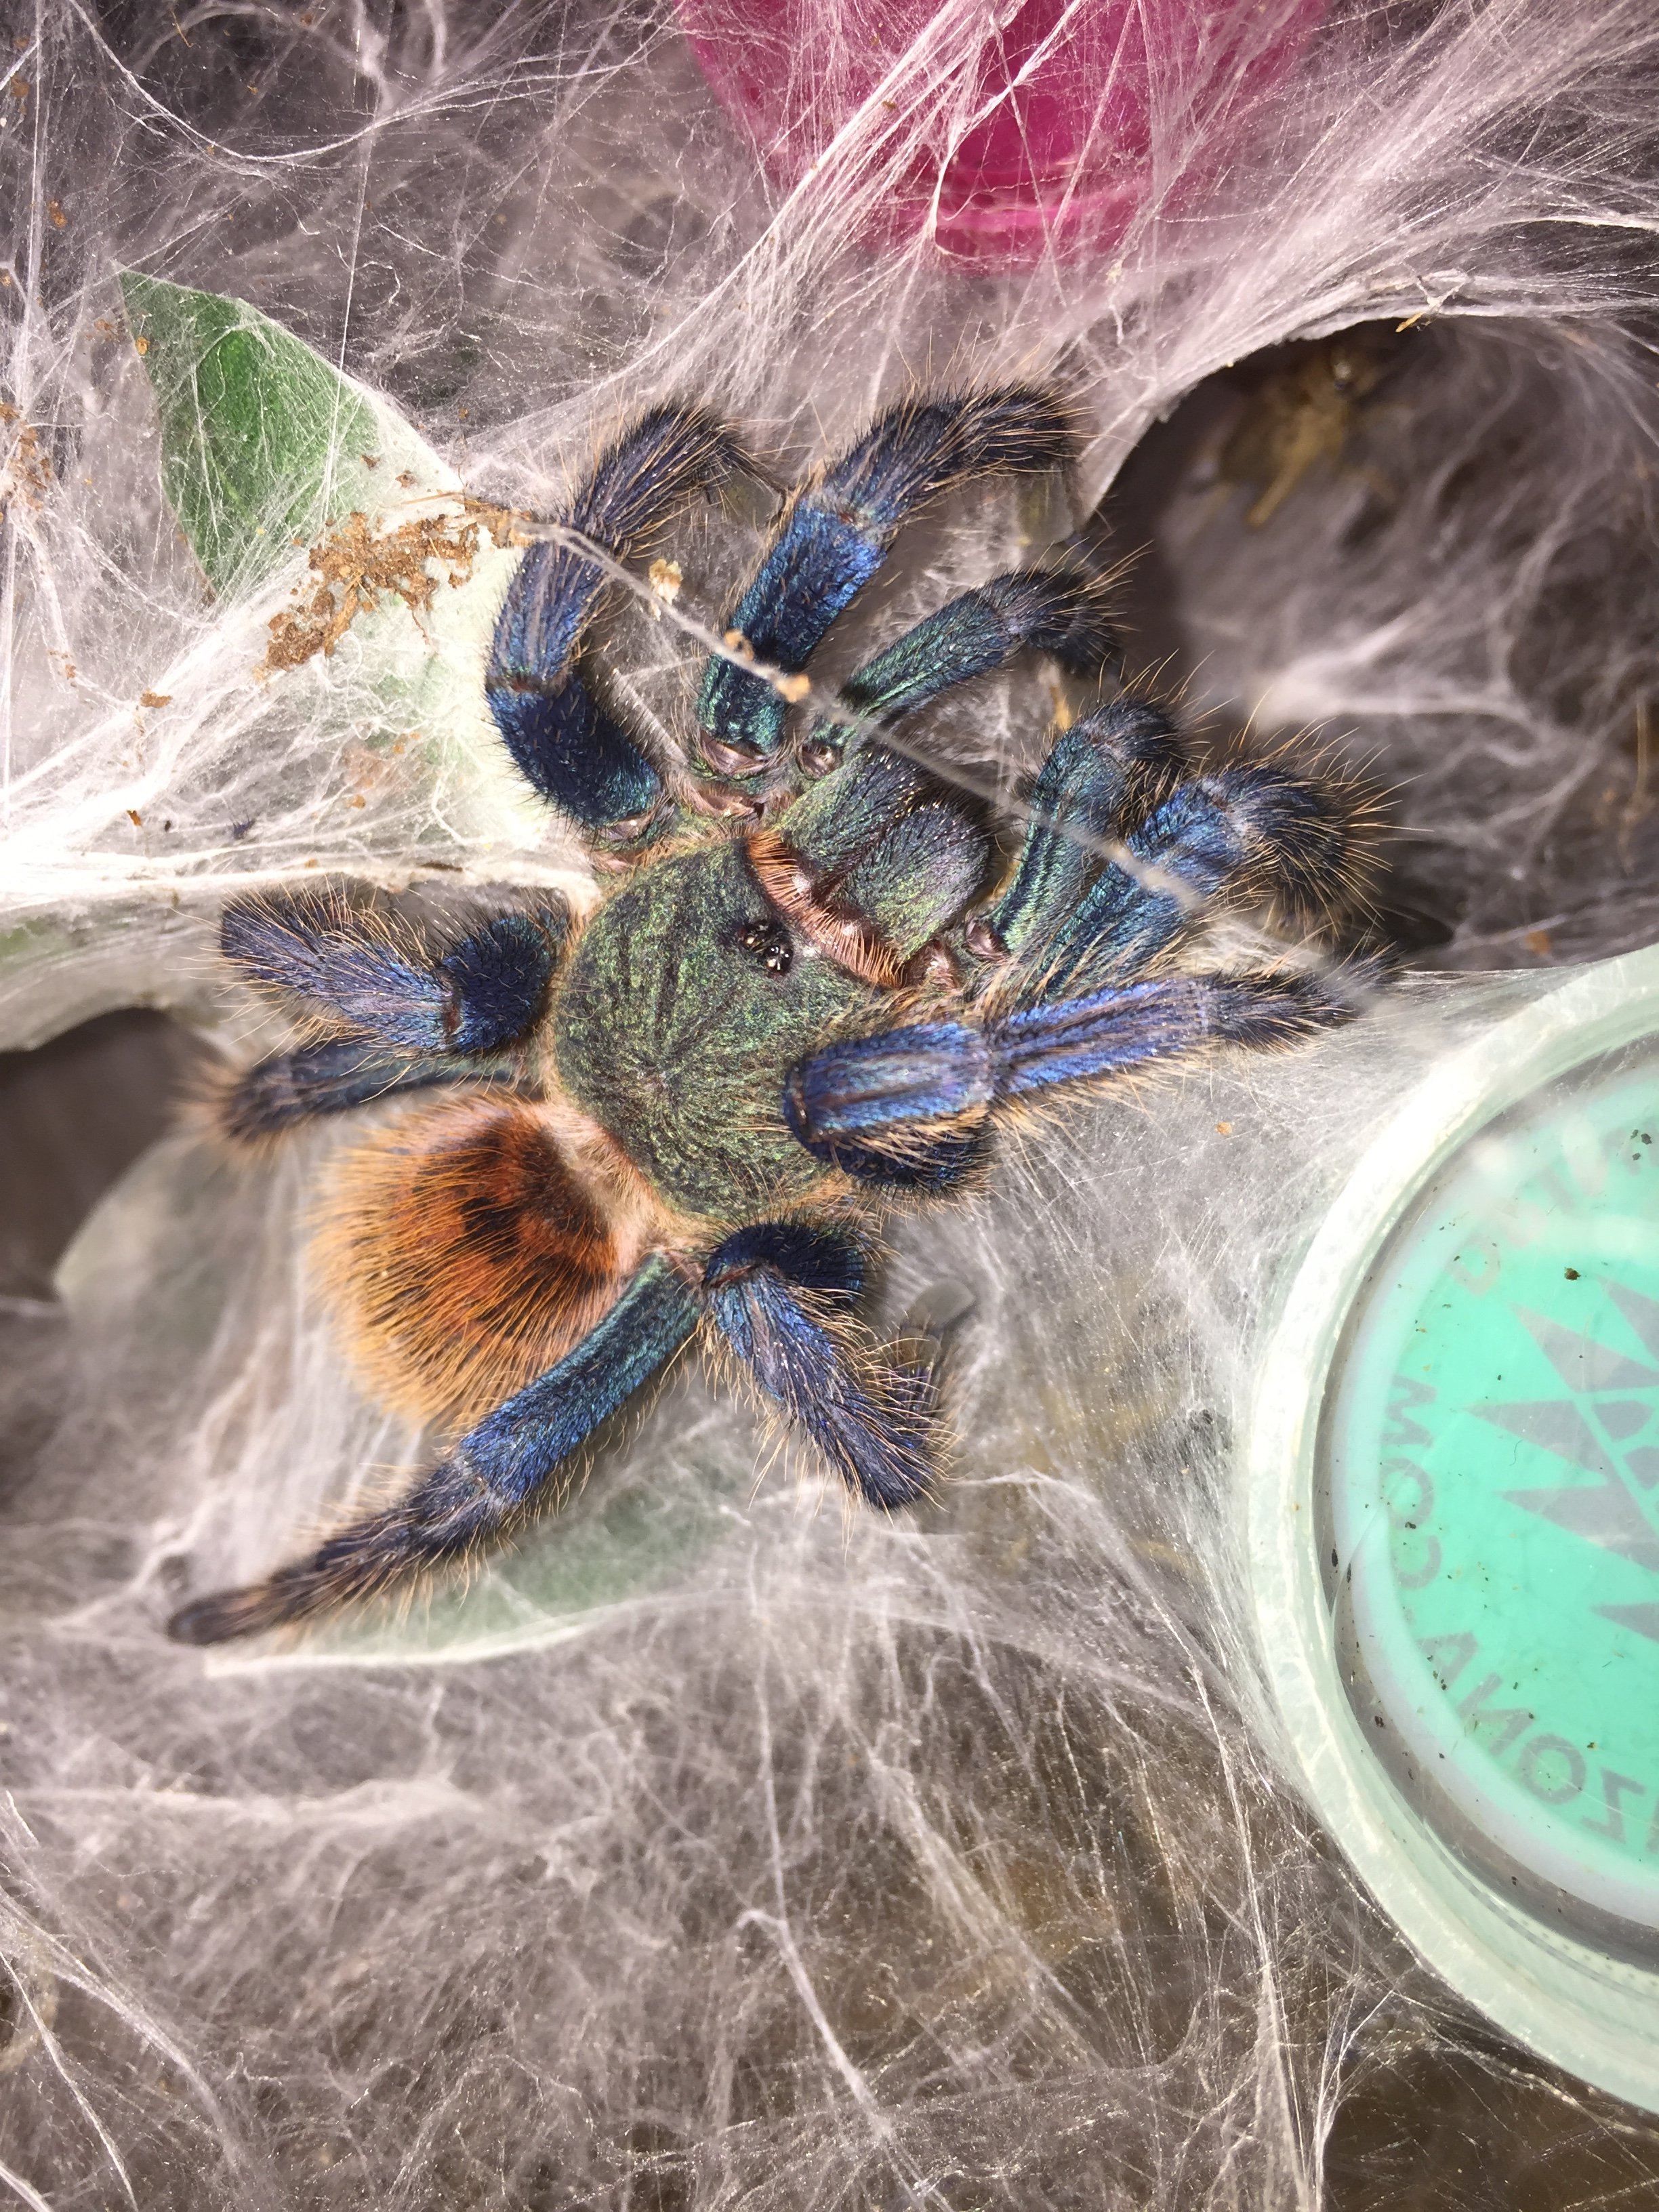 Beautiful GBB ready to attack